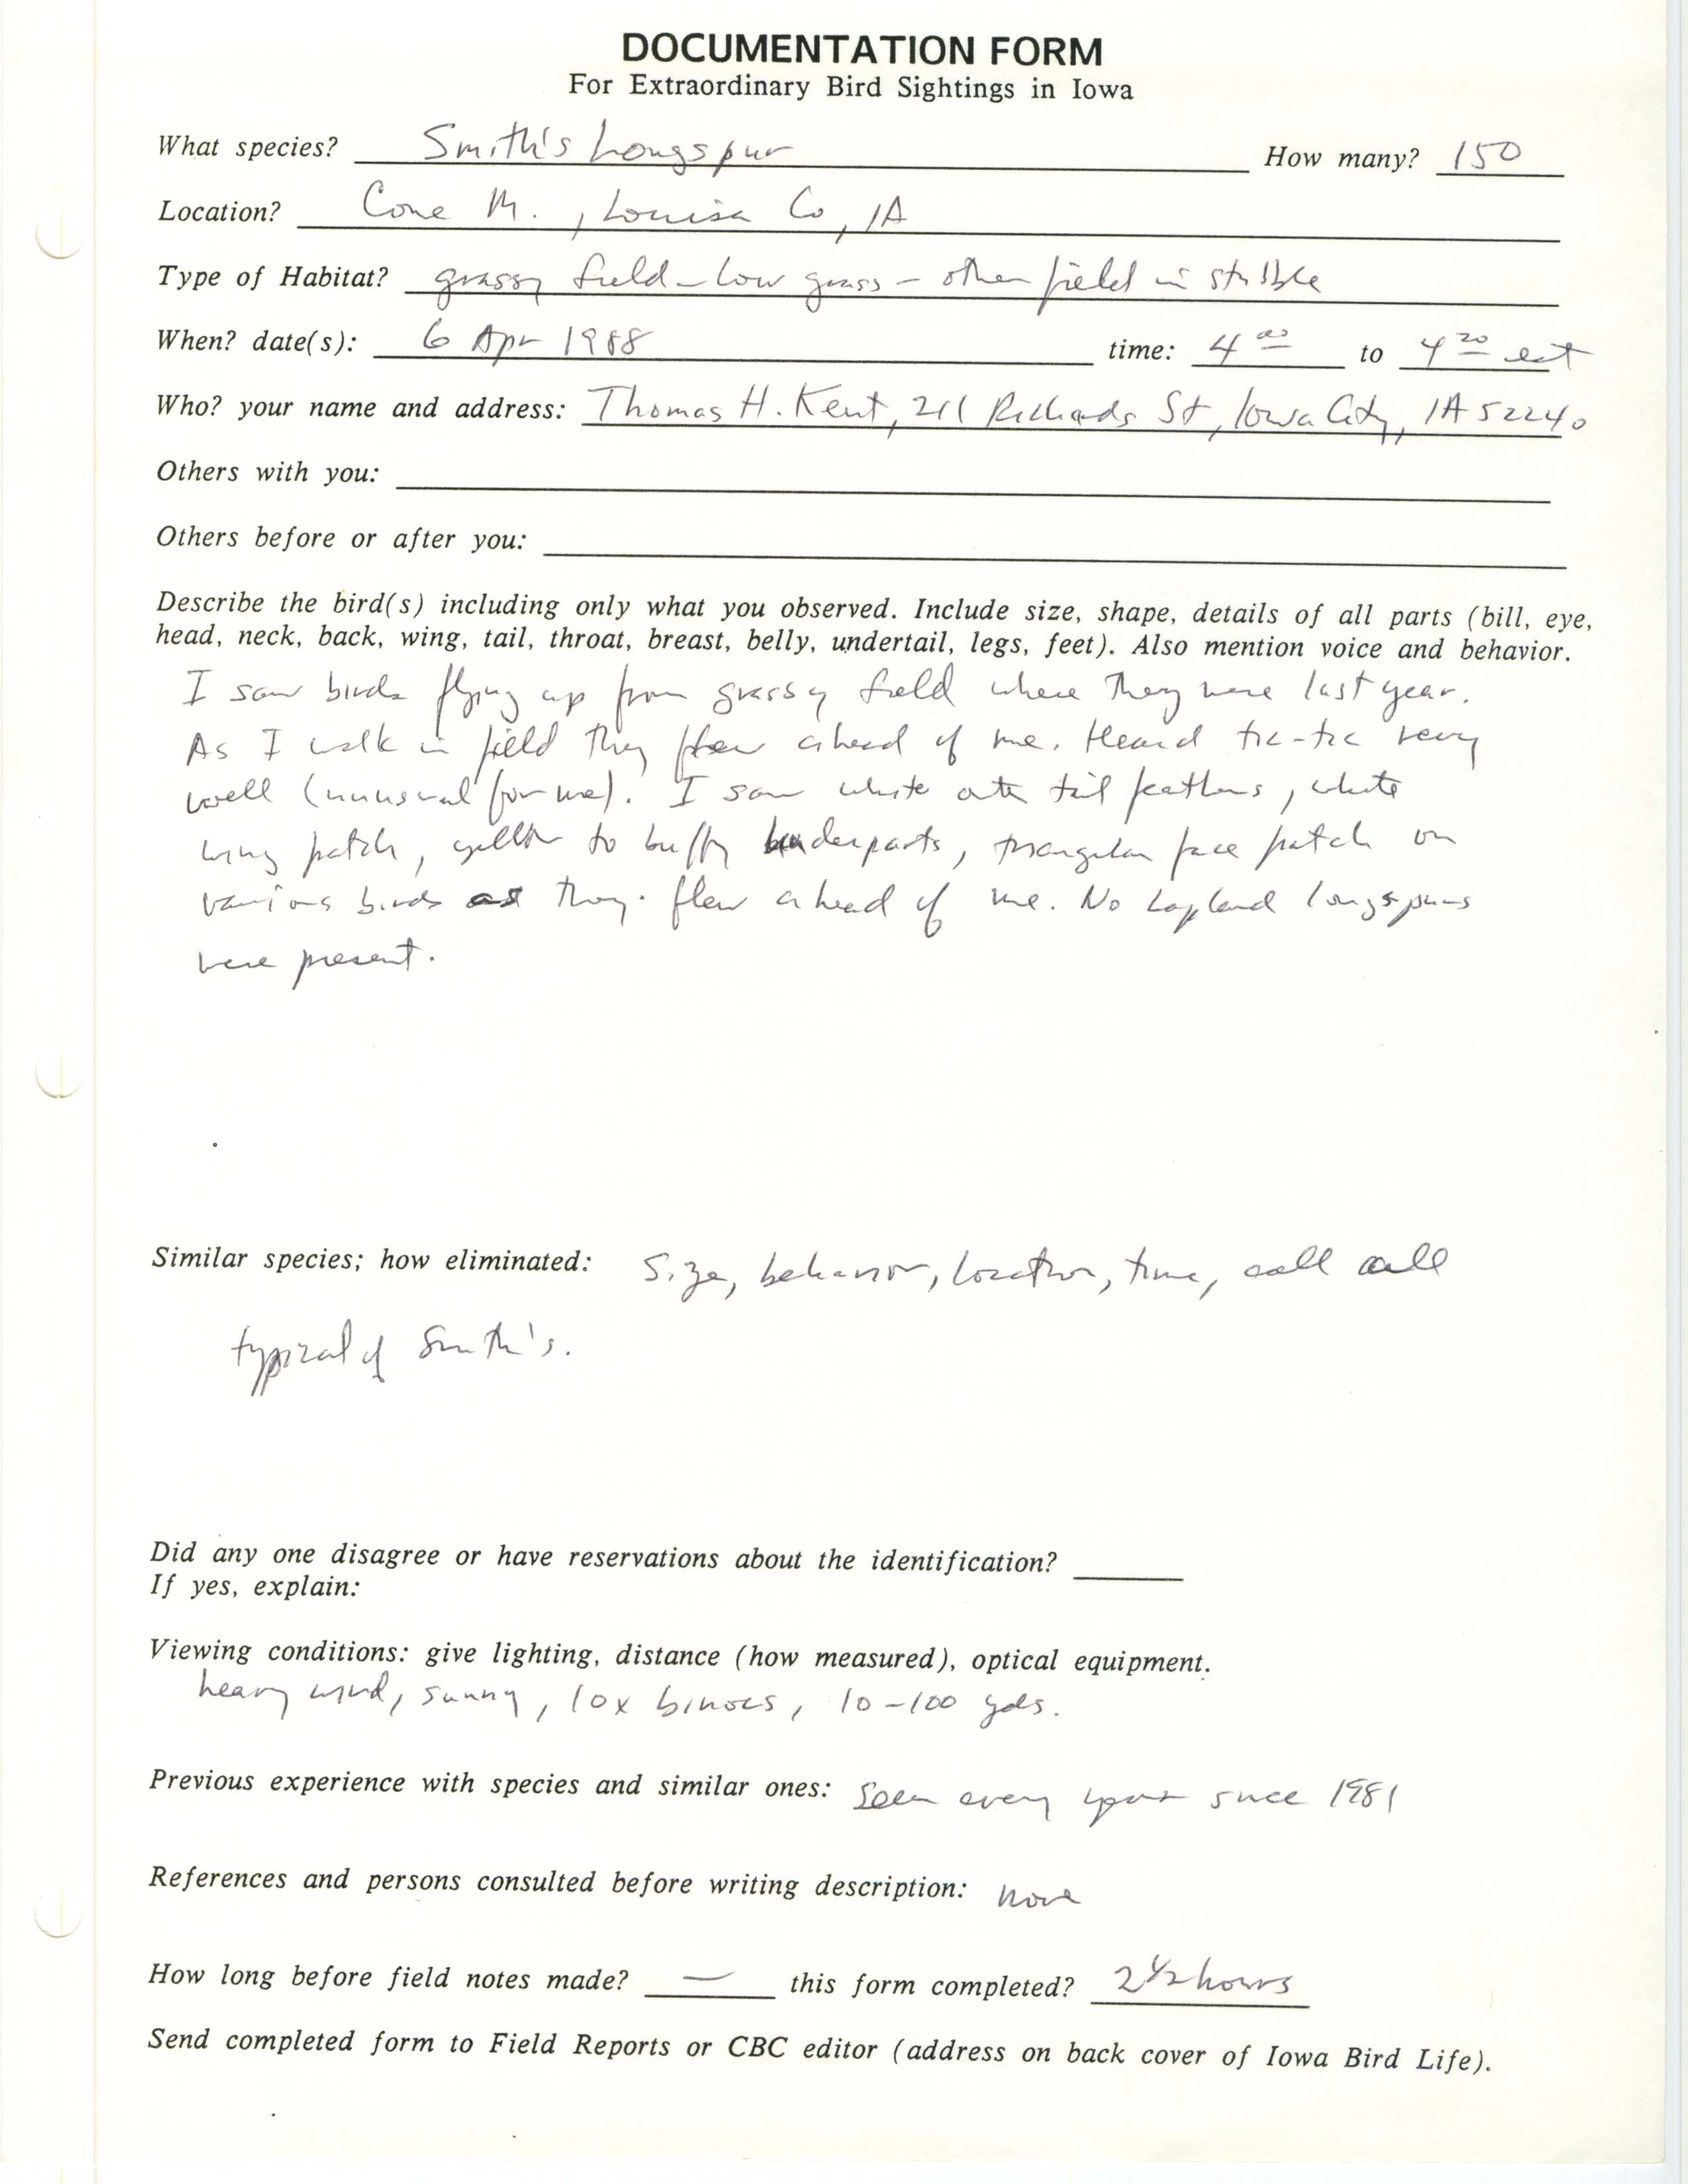 Rare bird documentation form for Smith's Longspur at Cone Marsh in 1988